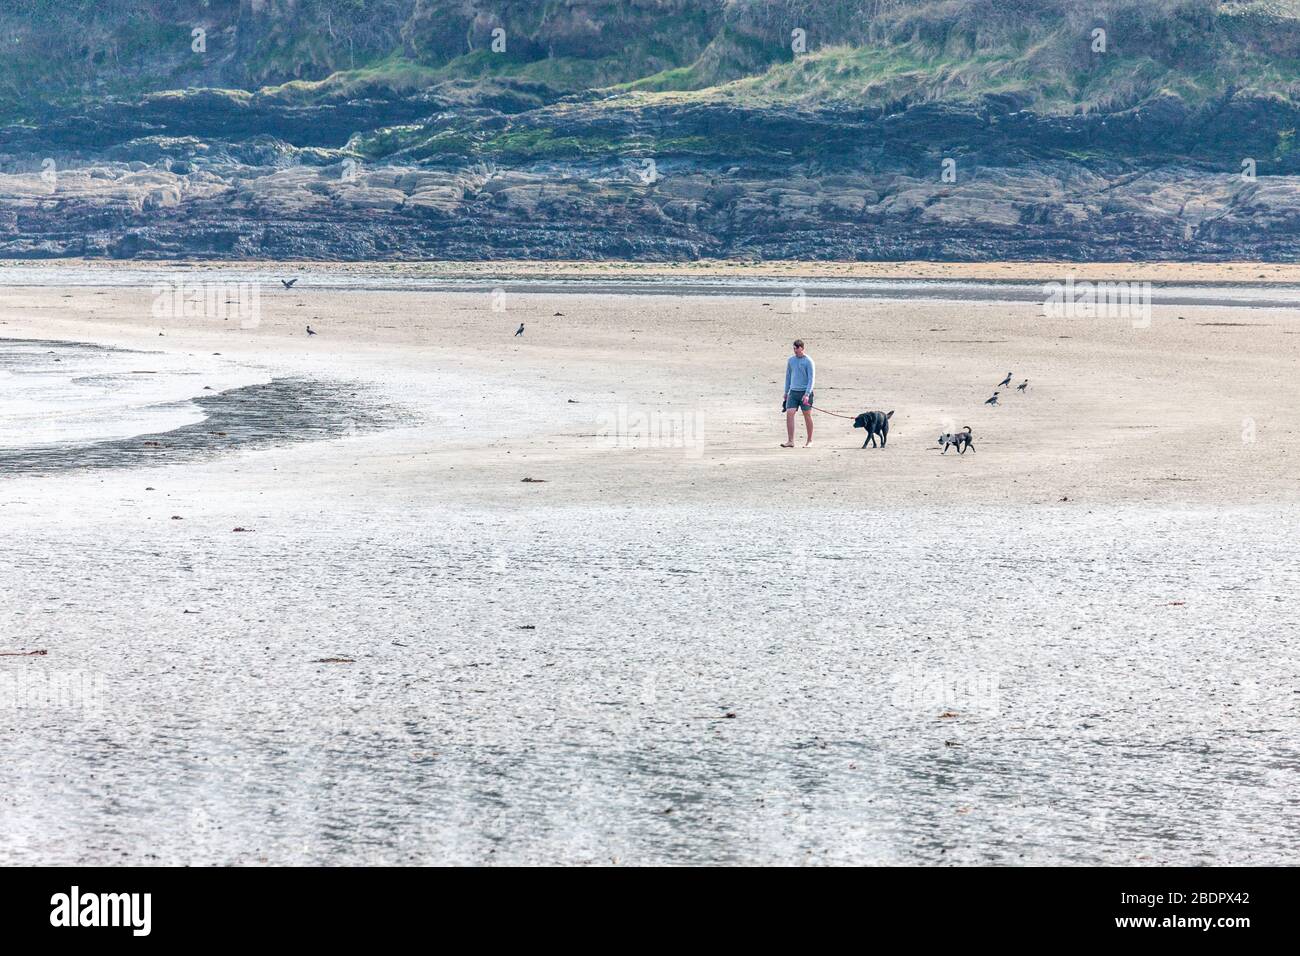 Fountainstown, Cork, Ireland. 09th April, 2020. A man walks his two dogs on an empty beach at Fountainstown, Co. Cork, Ireland. Gardai and local authorities have restricted access to beaches only to  people living within 2Km, in an effort to stem the spread of Covid-19. Government medical advisers have raised concerns about a possible surge in patients later this month if members of the public did not adhere to social-distancing requirements over the Easter weekend and Gardai have stepped up patrols on major road and other well known meeting places.  - Credit; David Creedon / Alamy Live News Stock Photo